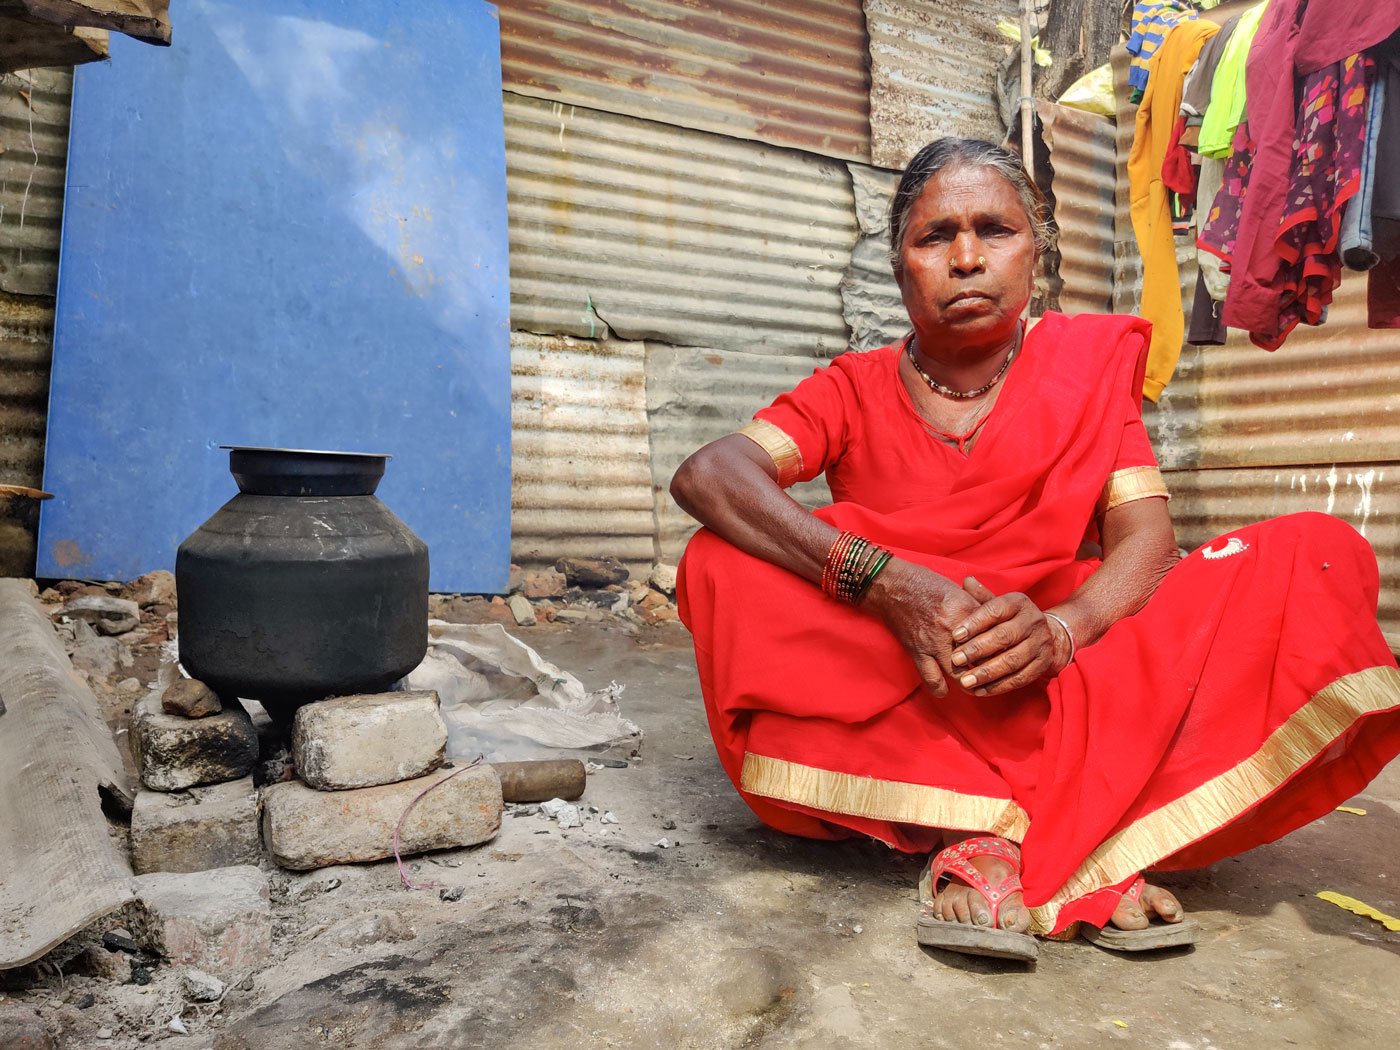 Shakuntala Londhe, 65, has a speech impairment. She spends two to three hours a day inhaling smoke generated by the stove